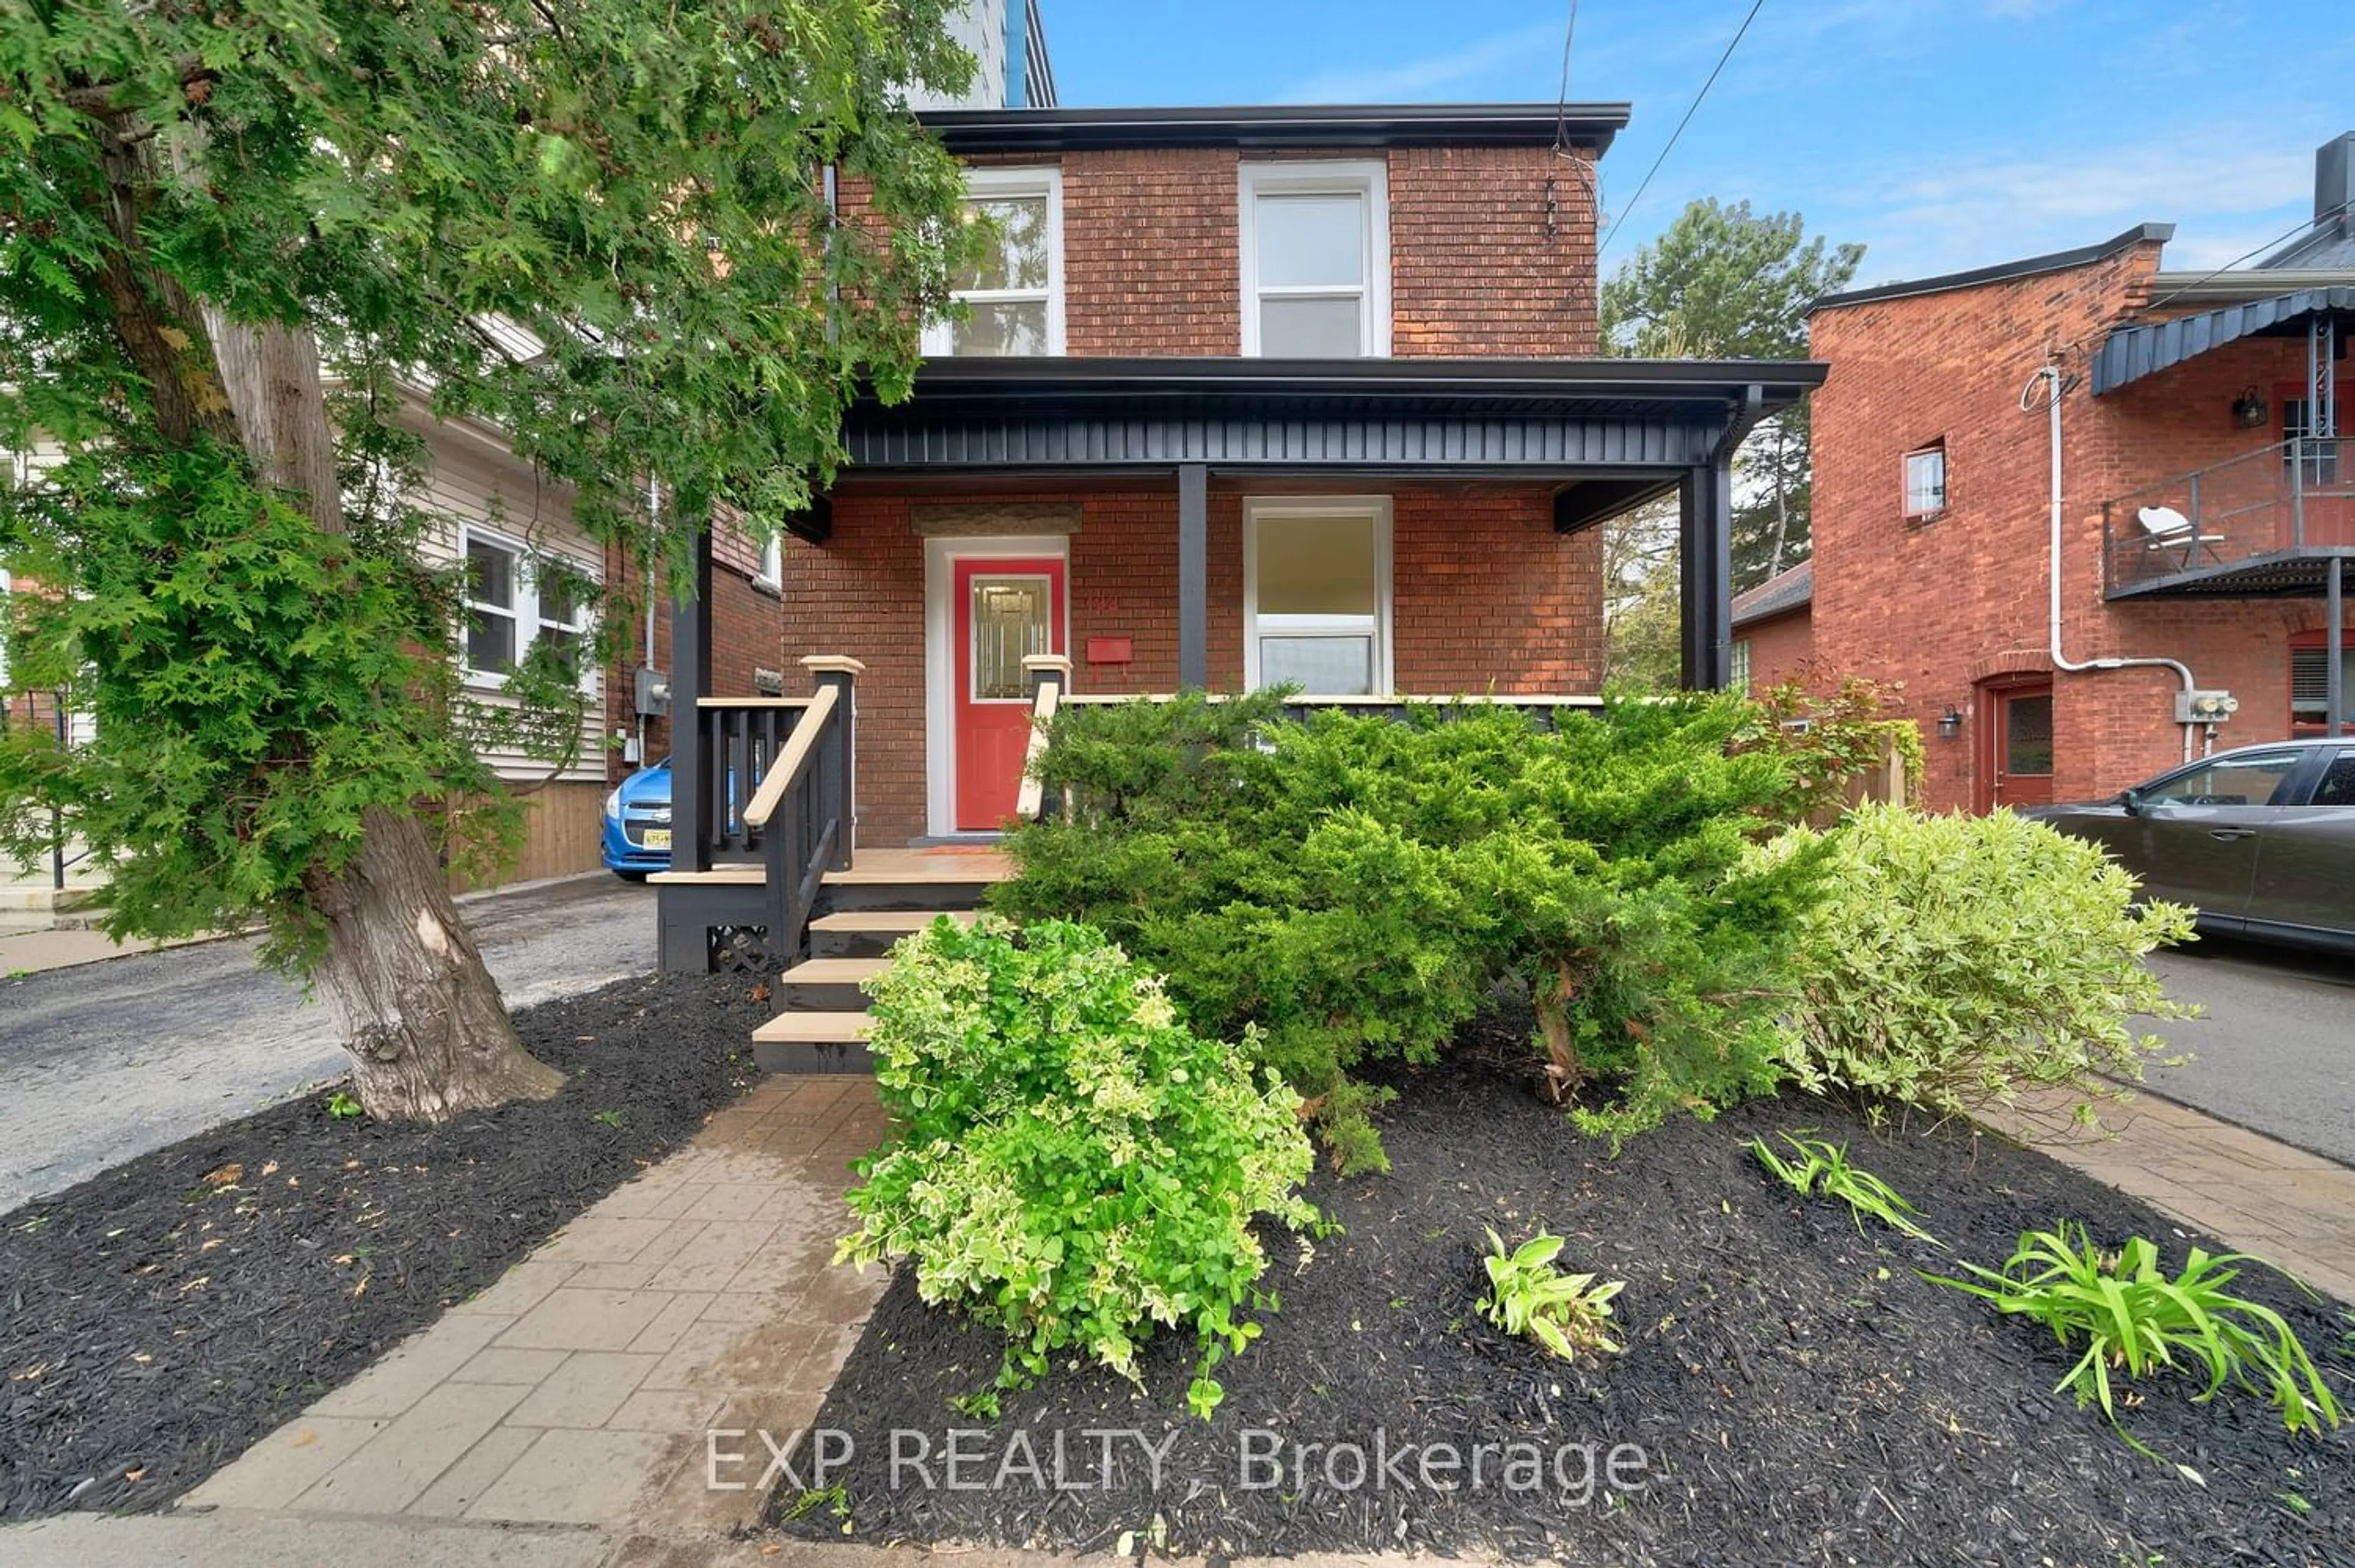 Home with brick exterior material for 192 Walnut St, Hamilton Ontario L8N 2M1